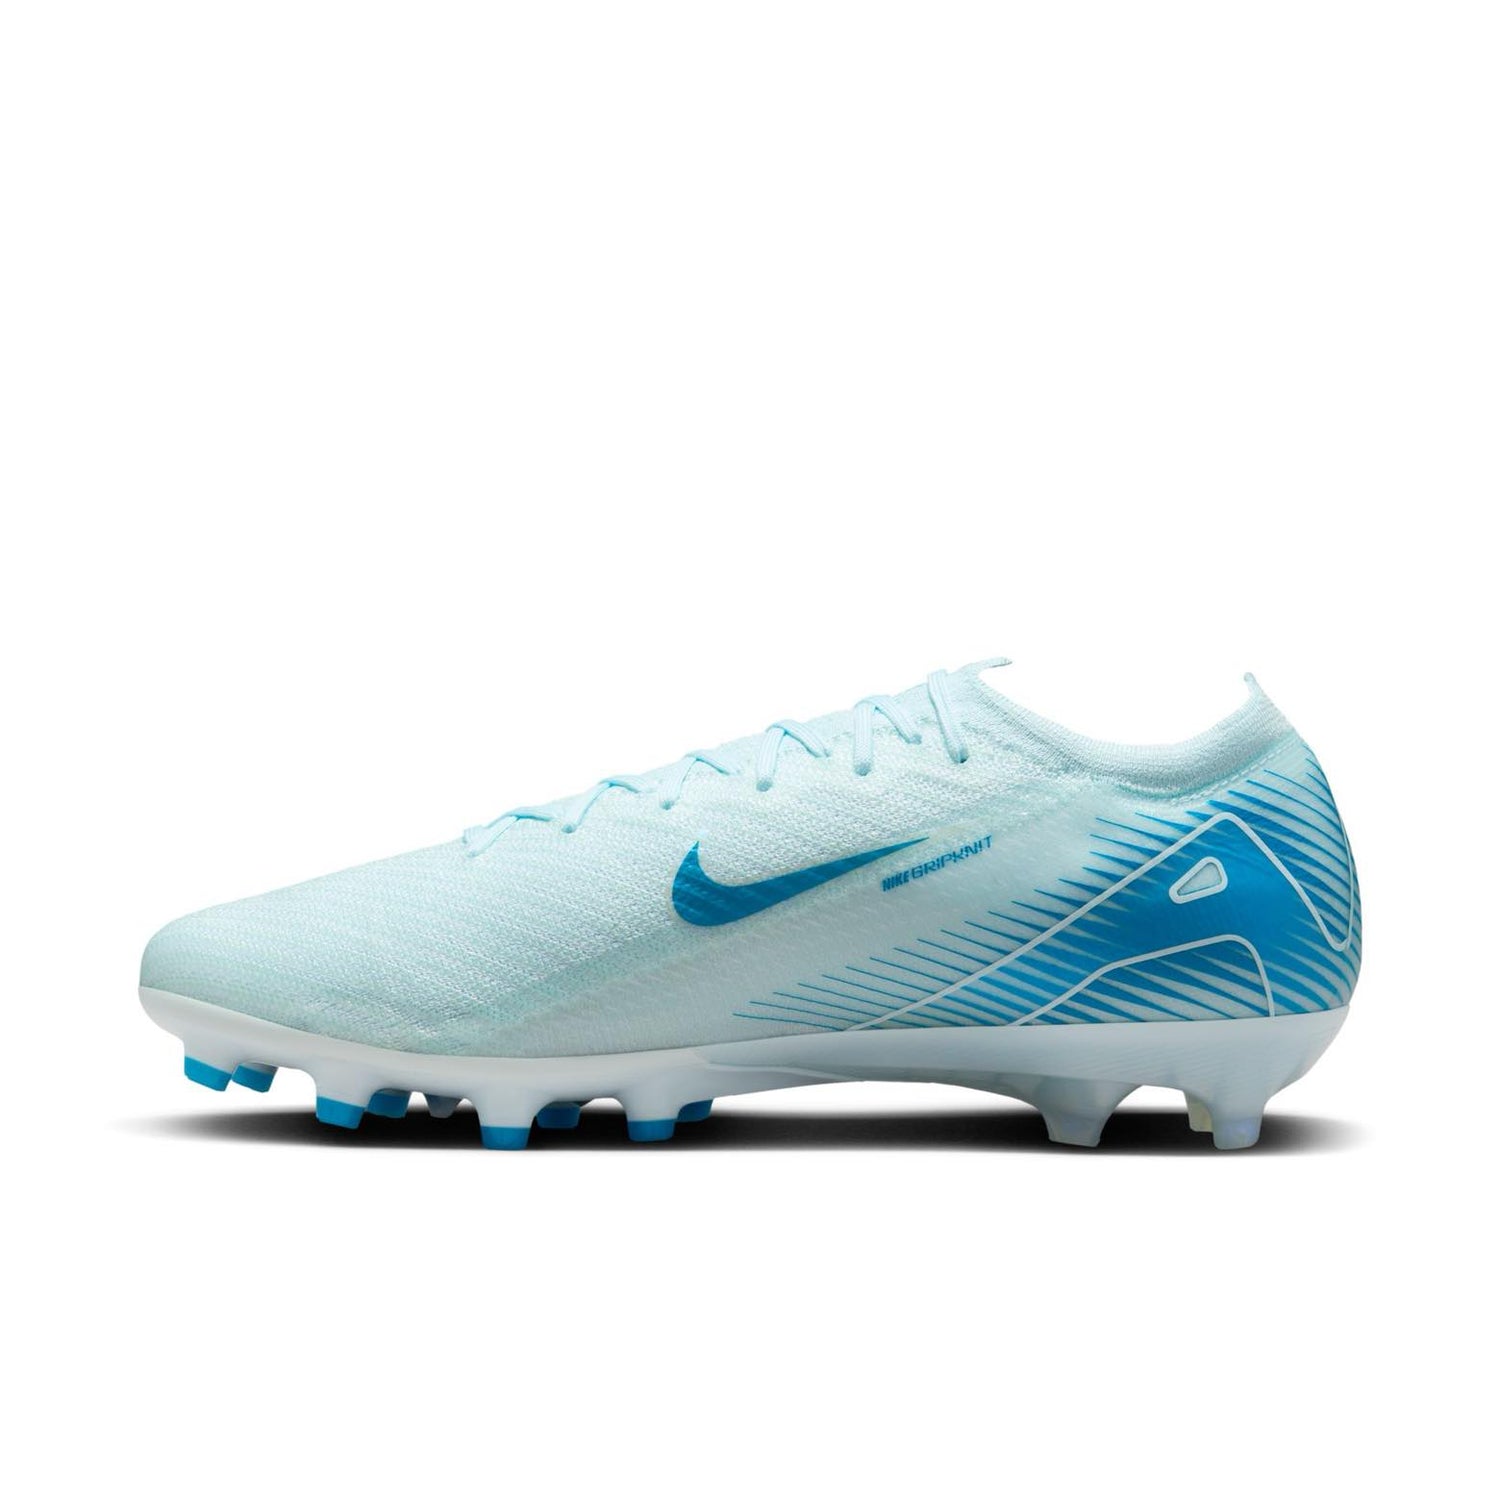 Nike Mercurial Vapor 16 Elite AG-Pro for elite speed and performance on artificial grass